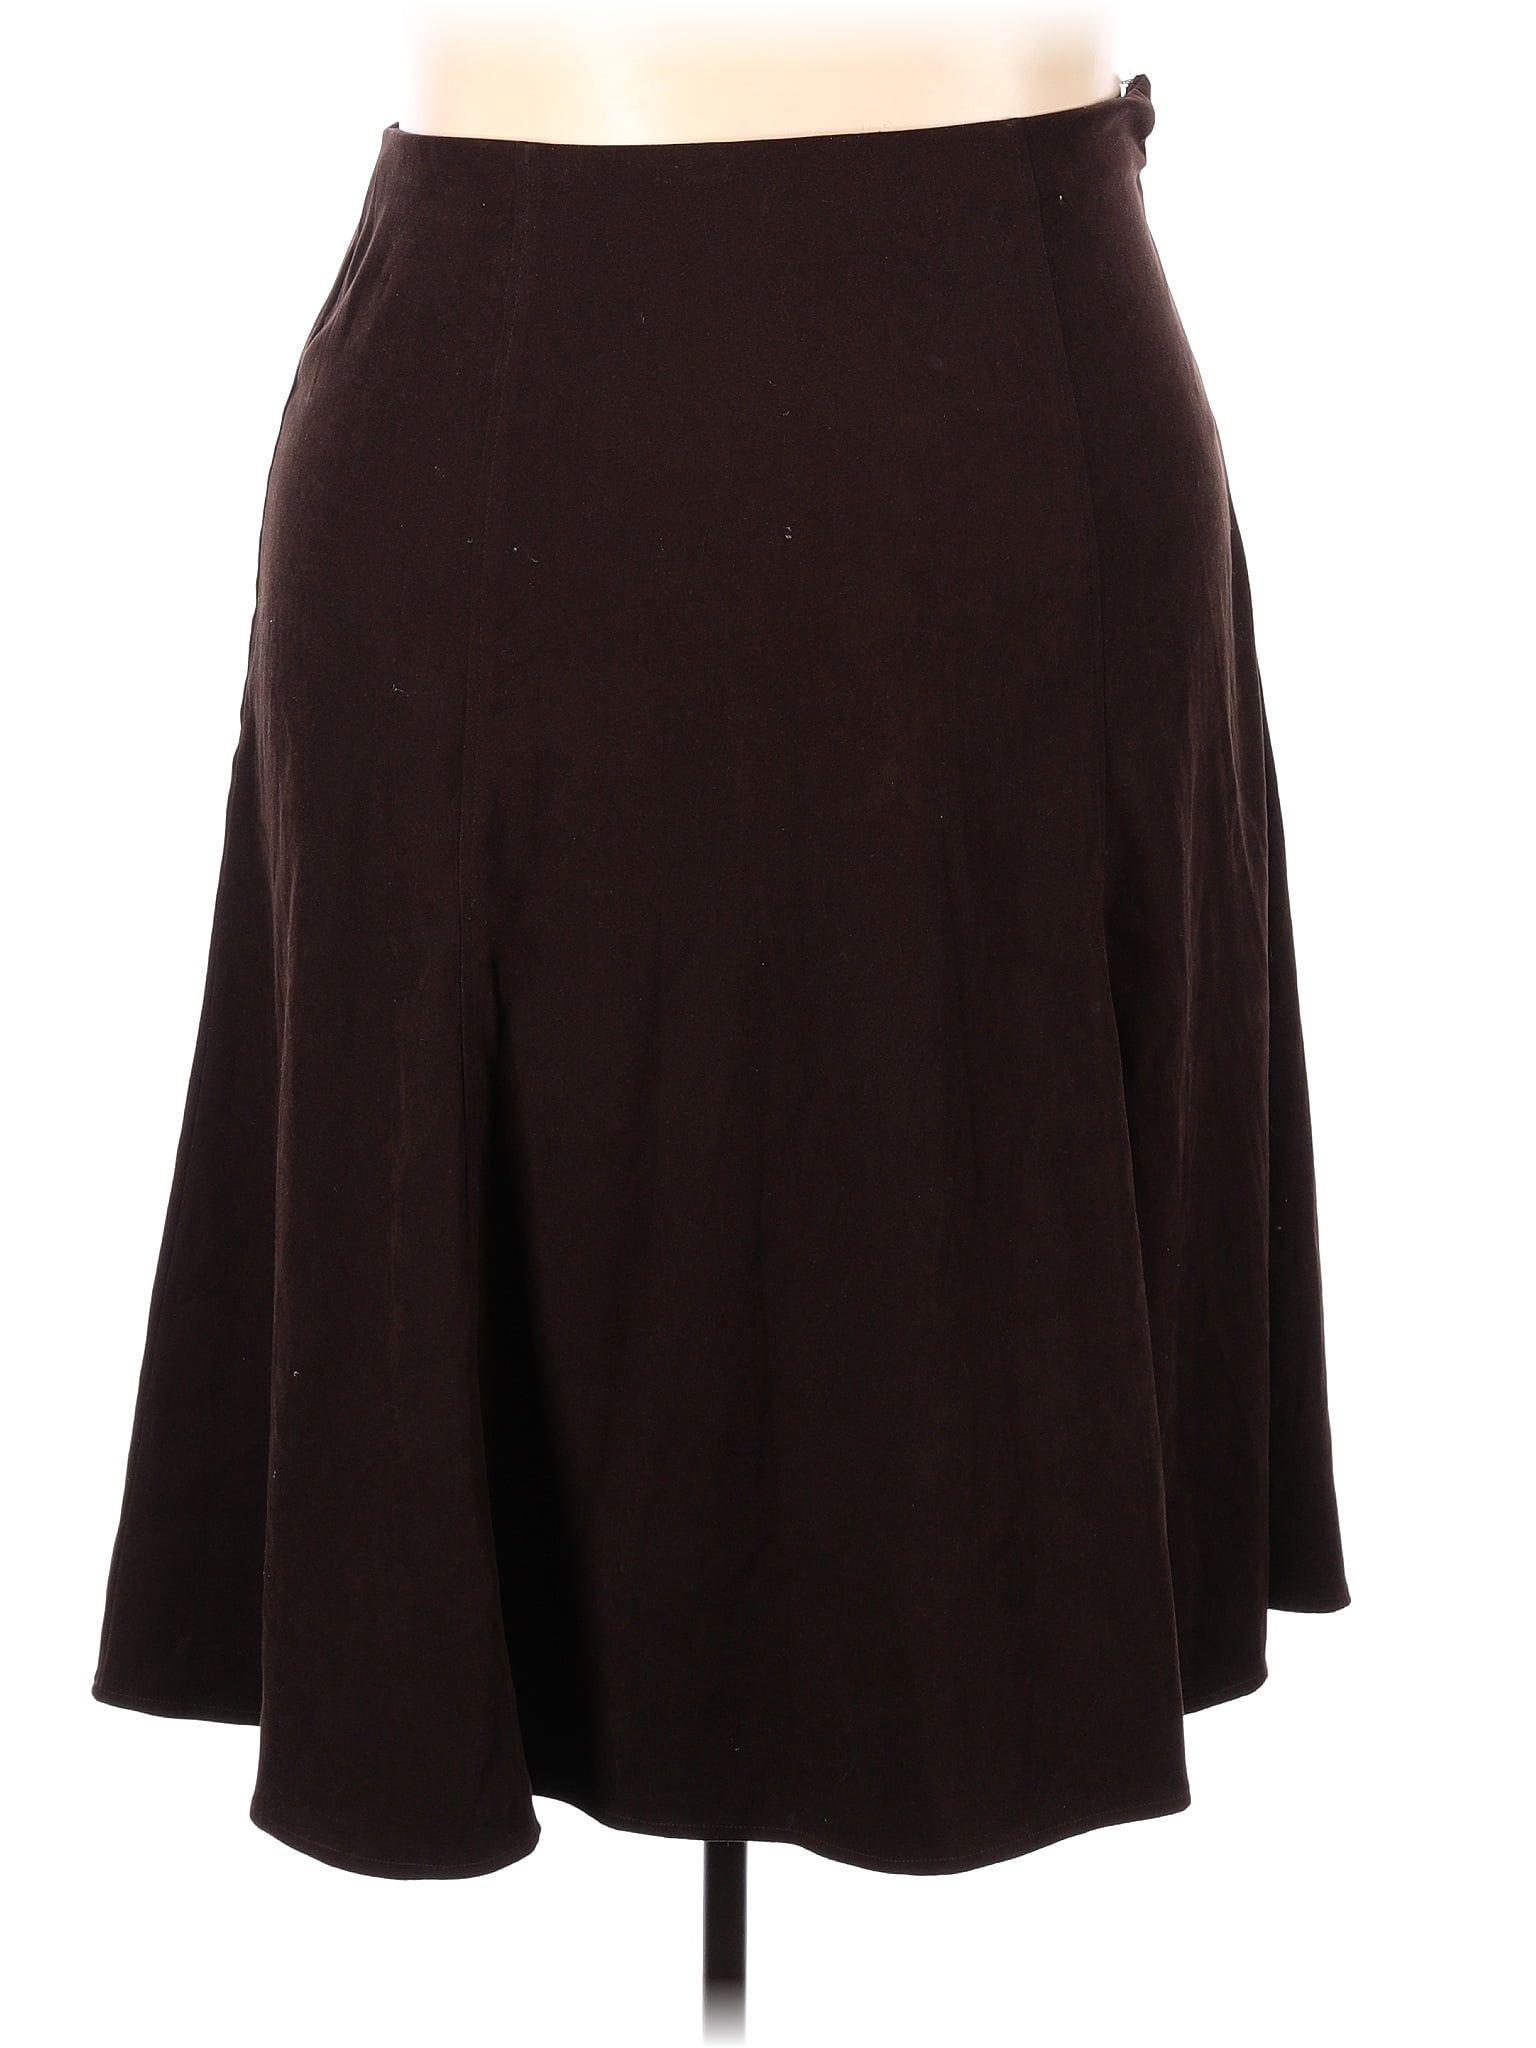 JM Collection Brown Casual Skirt Size 18 W (Plus) - 55% off | thredUP